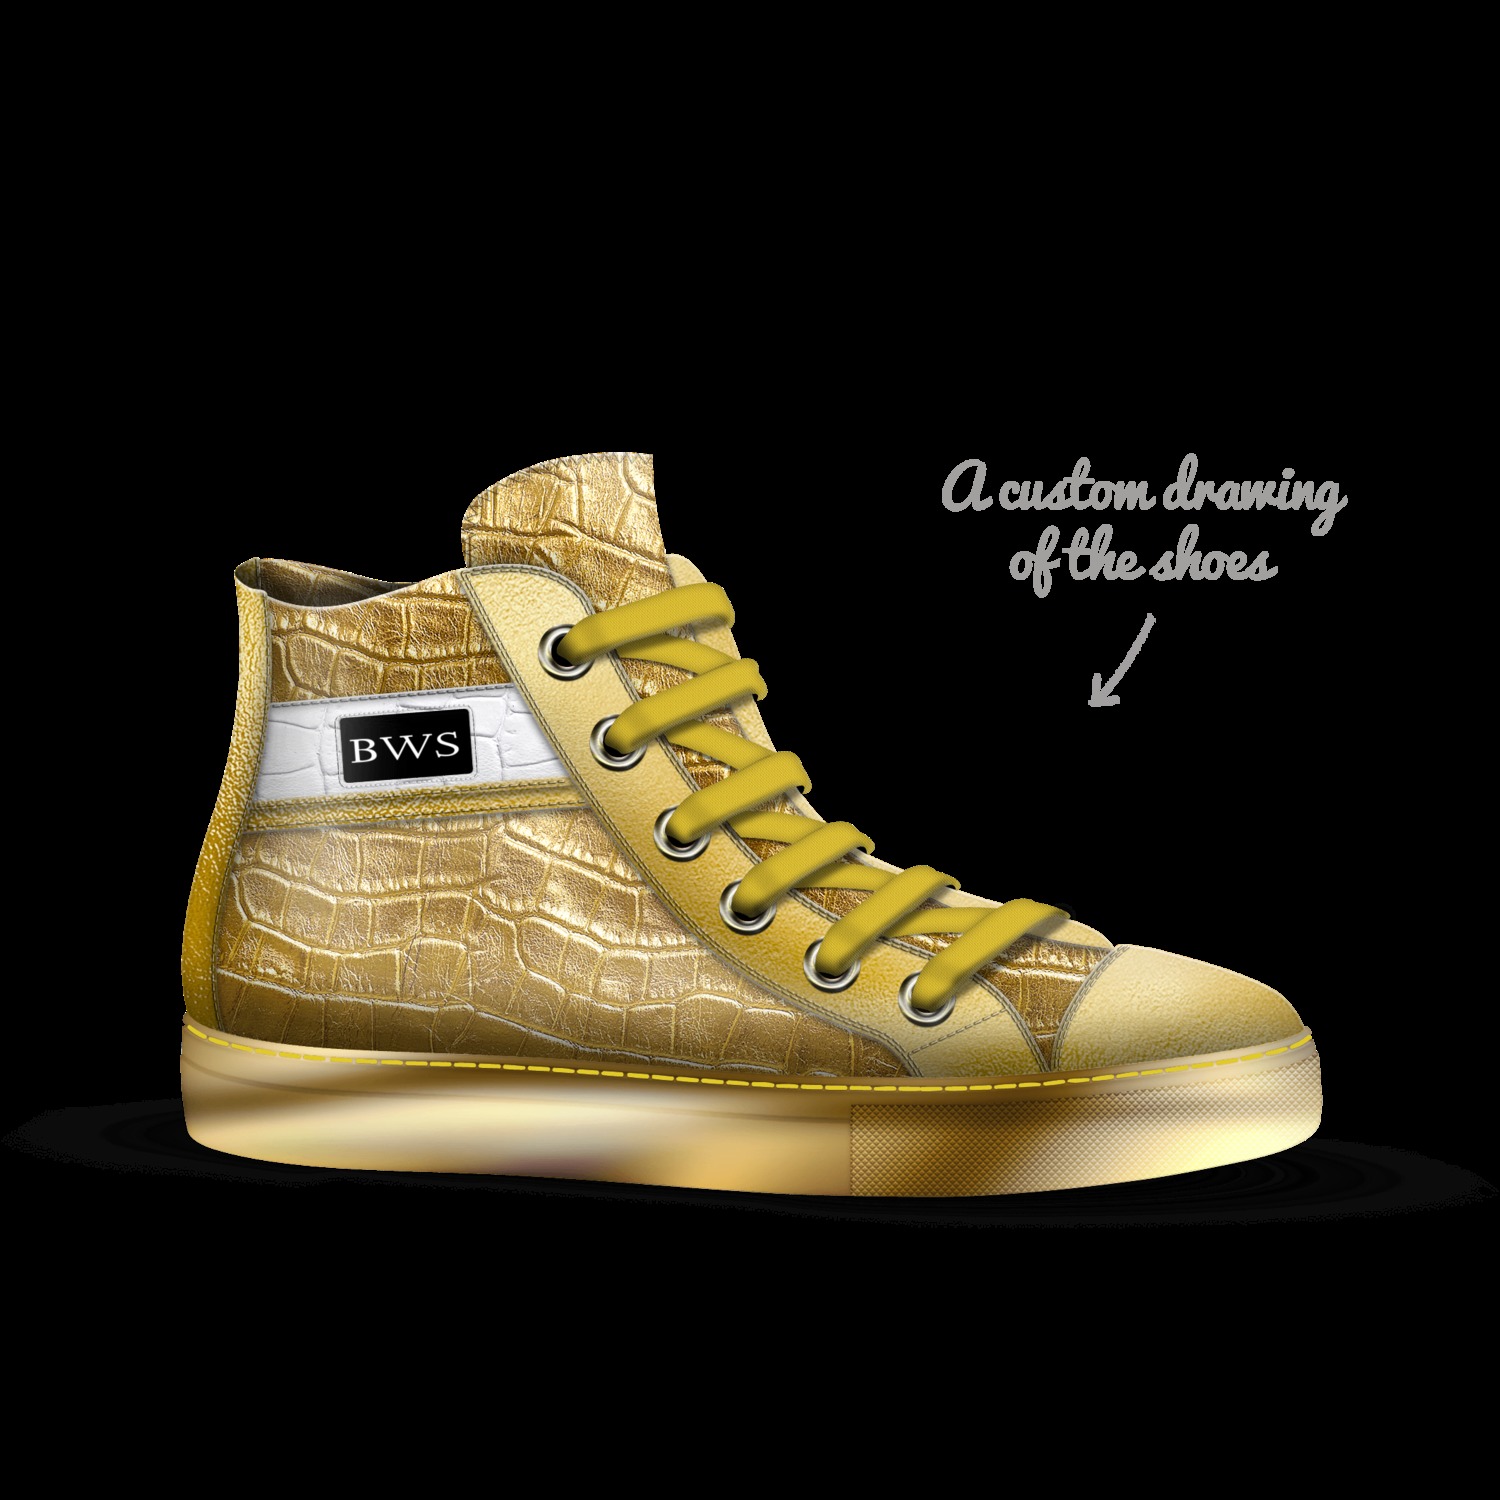 A Custom Shoe concept by Willie Evans